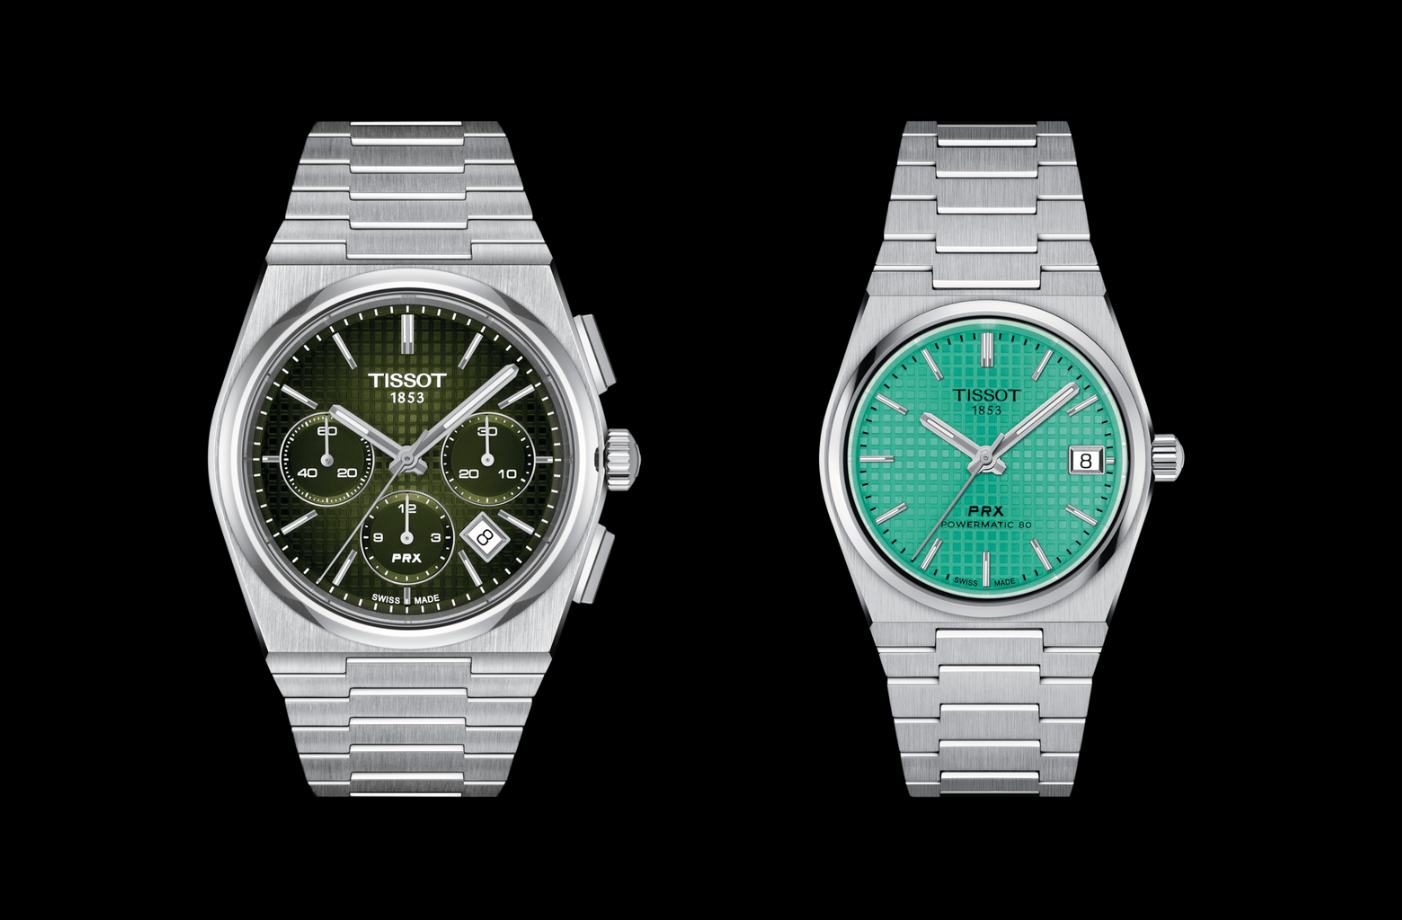 Tissot unveils new green Dials for the PRX and Powermatic 80